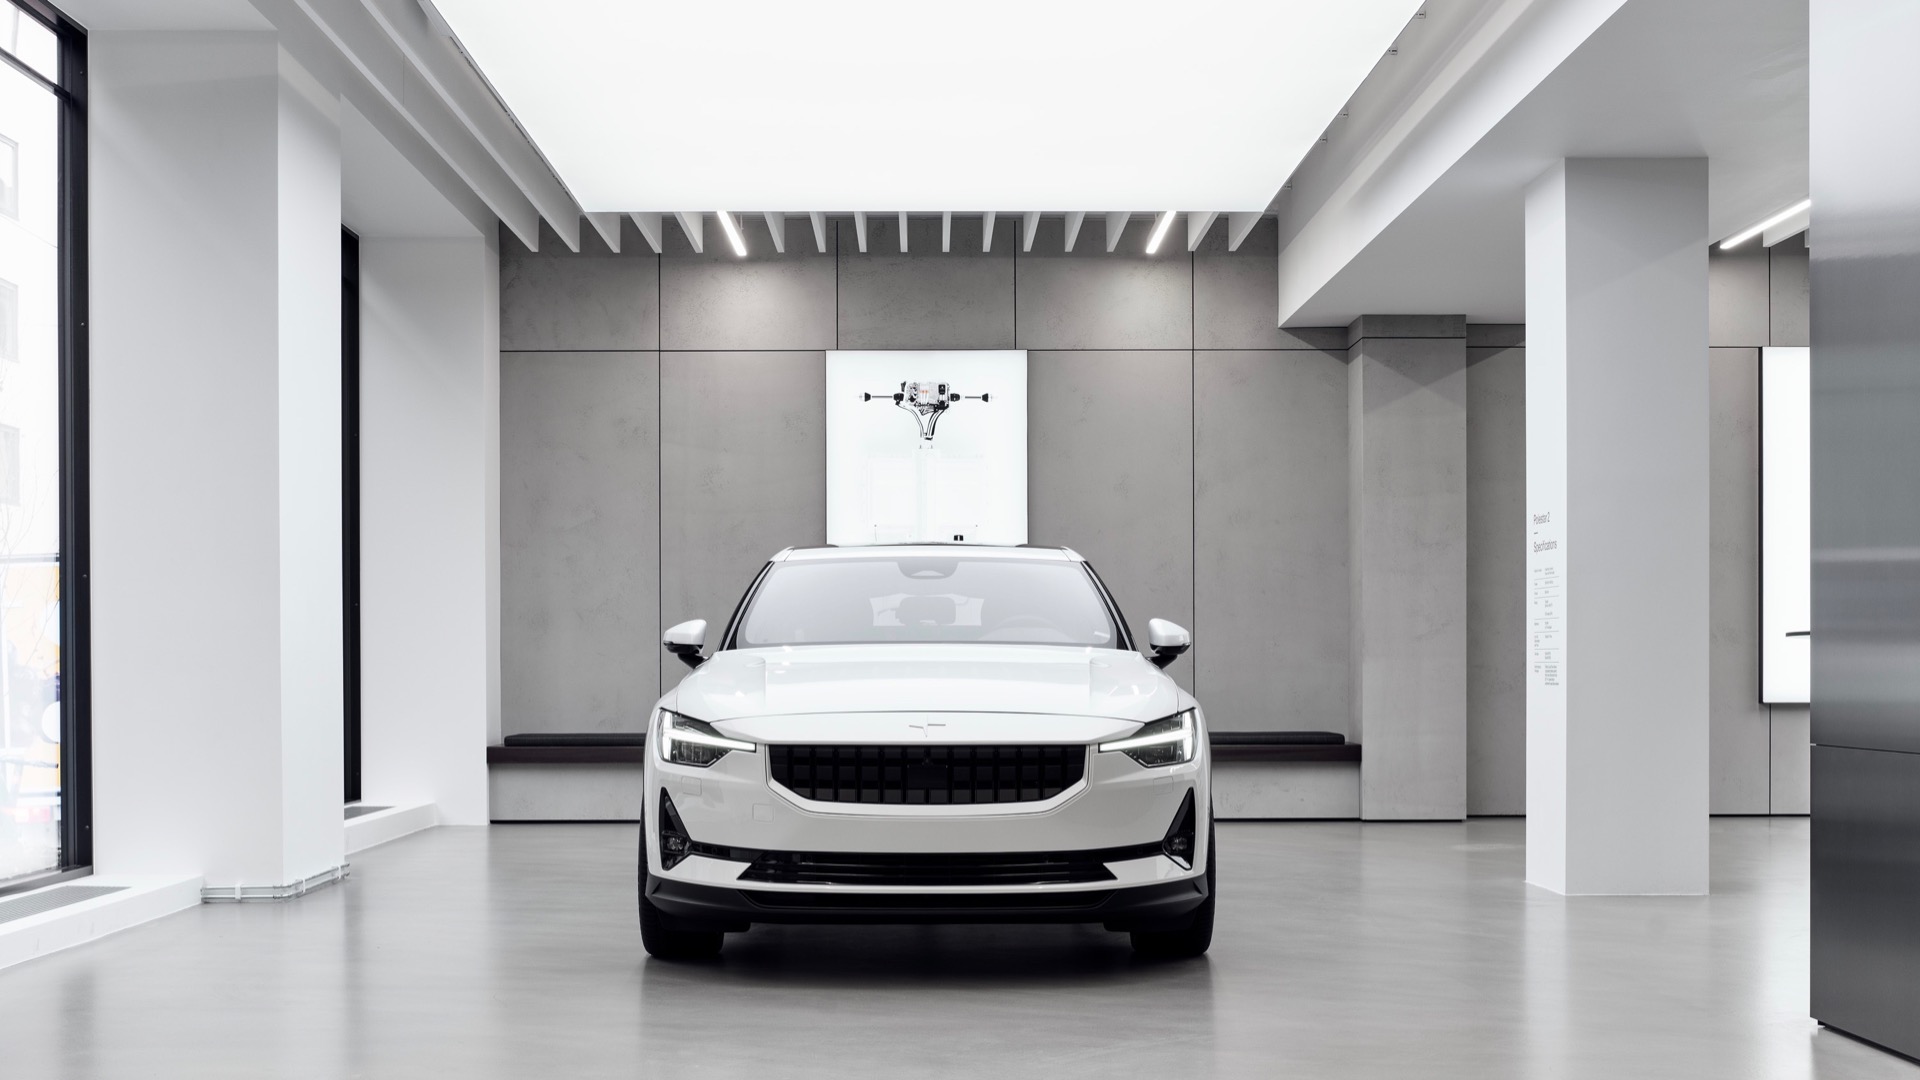 Buying a Polestar is as easy as a Tesla, but with real customer serviceBuying a Polestar is as easy as a Tesla, but with real customer service